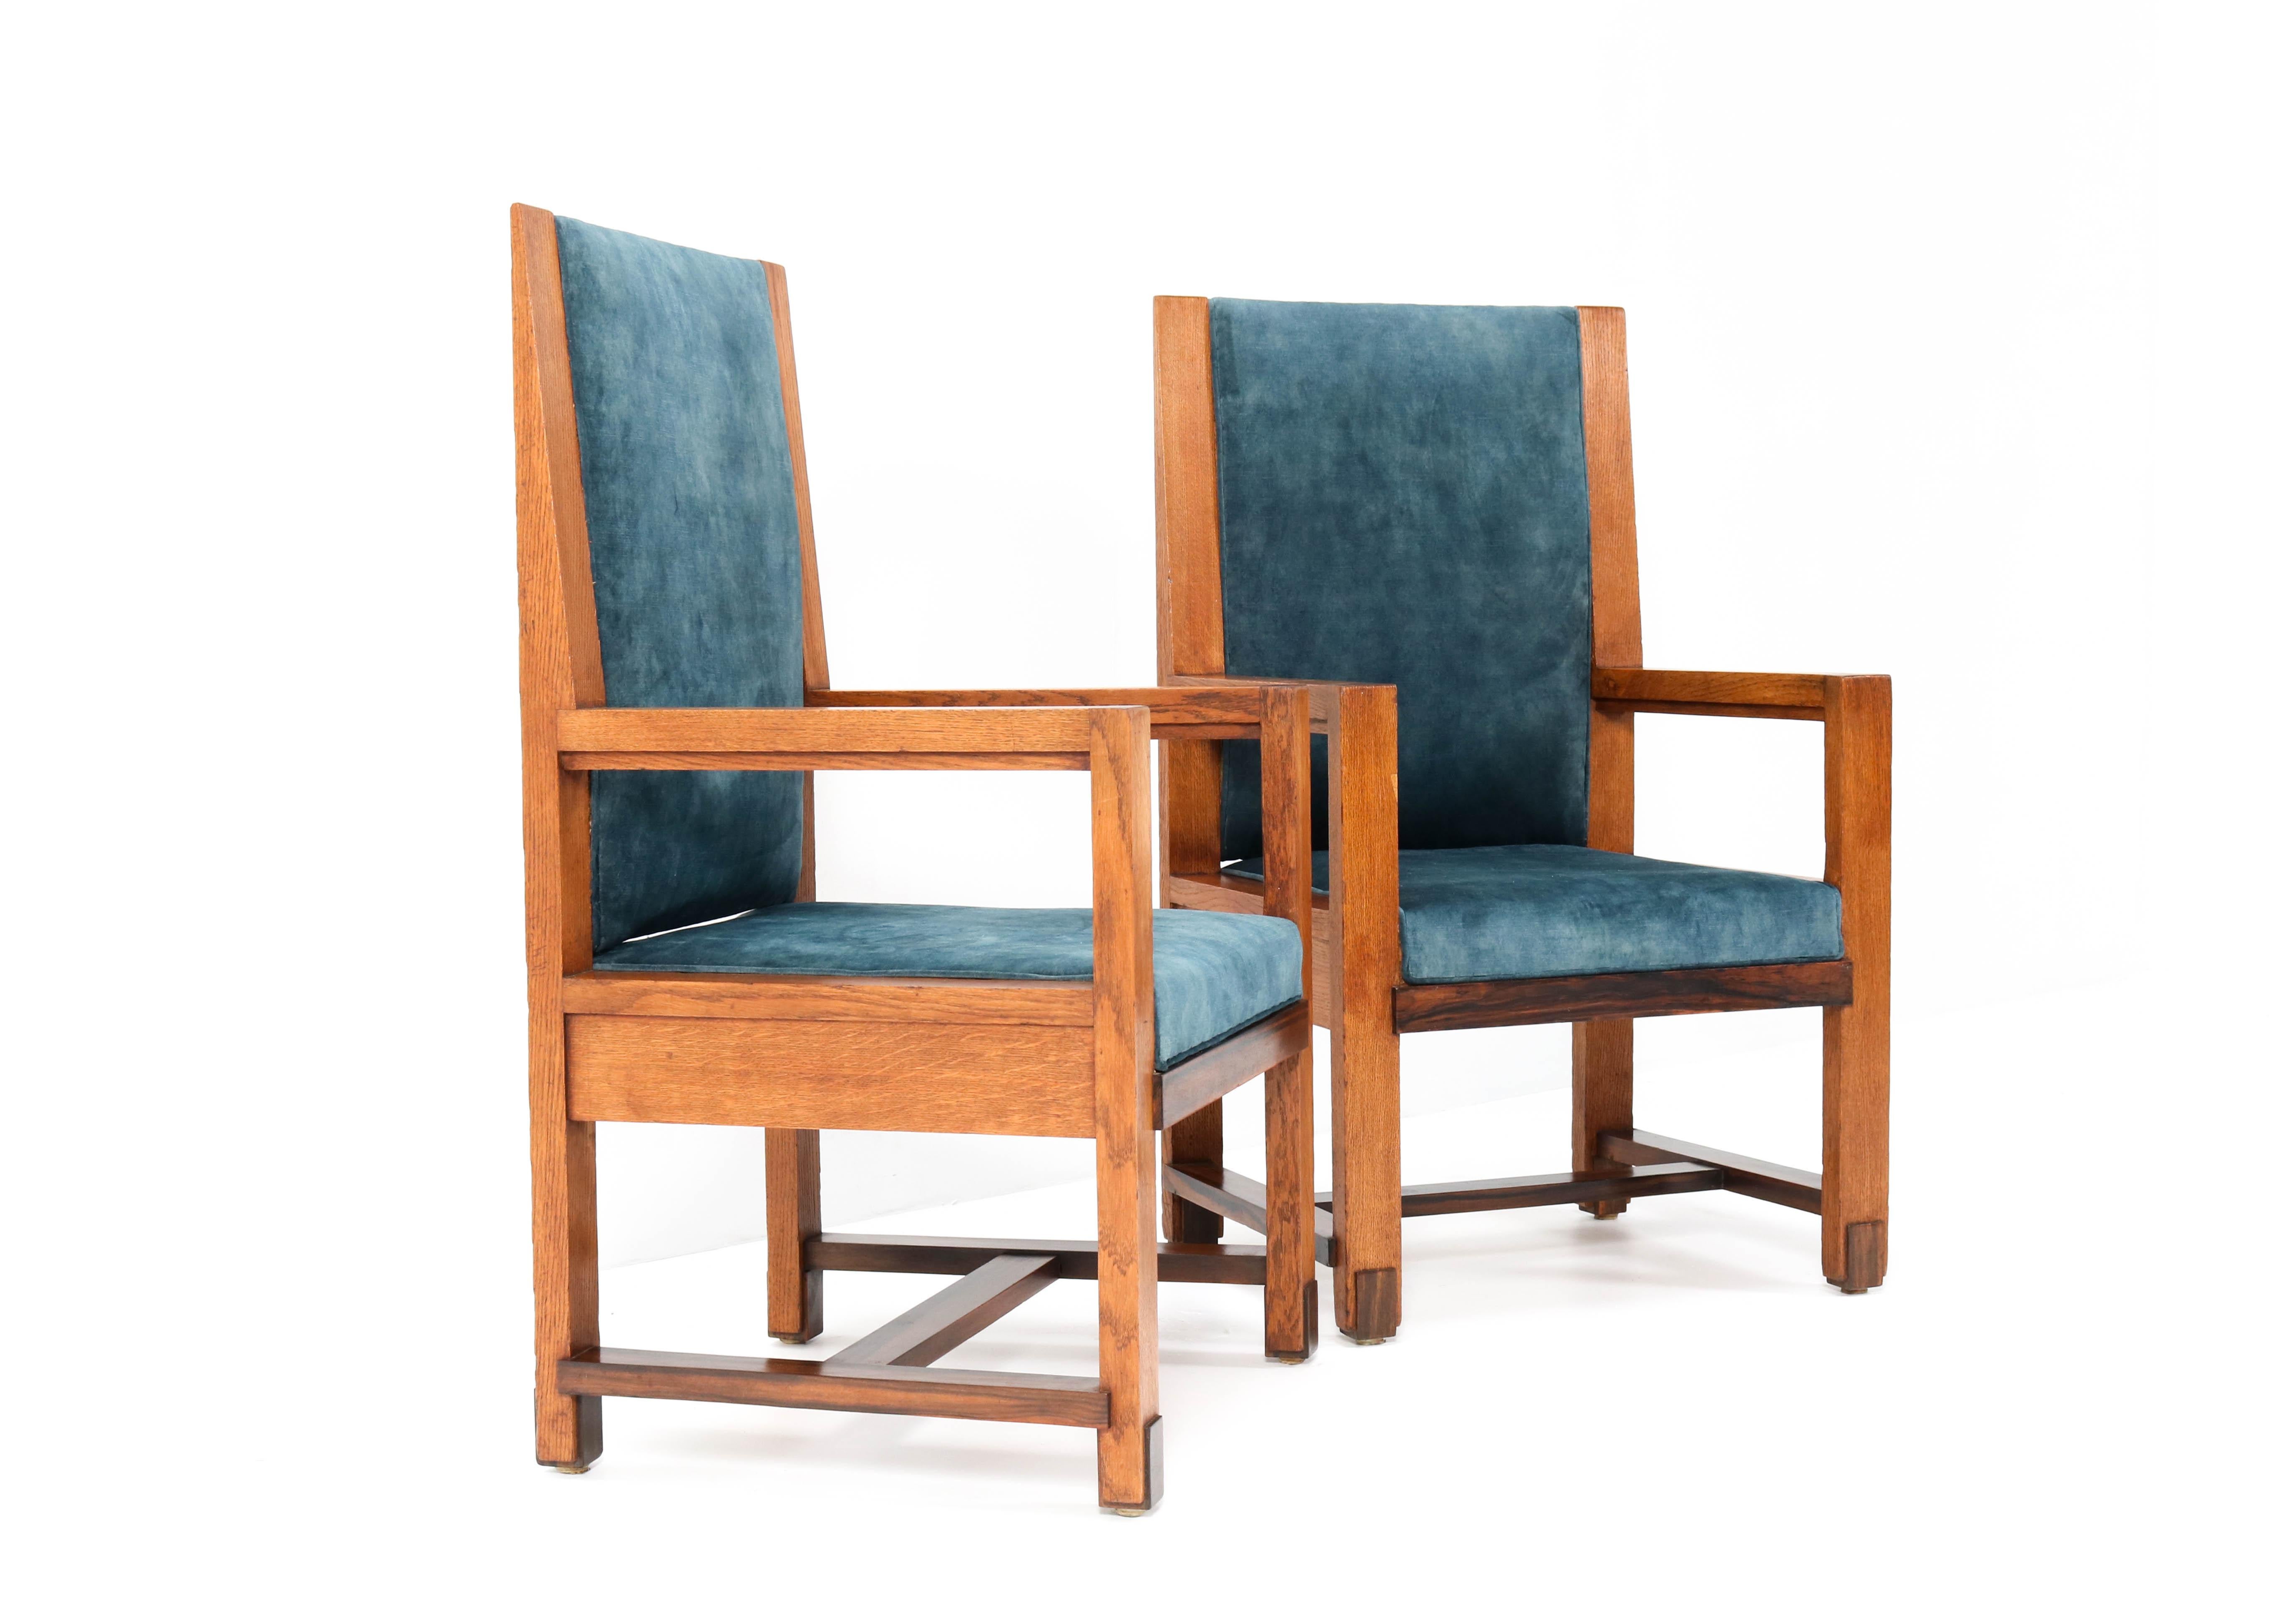 Fabric Two Oak Art Deco Haagse School Armchairs by Henk Wouda for Pander, 1924